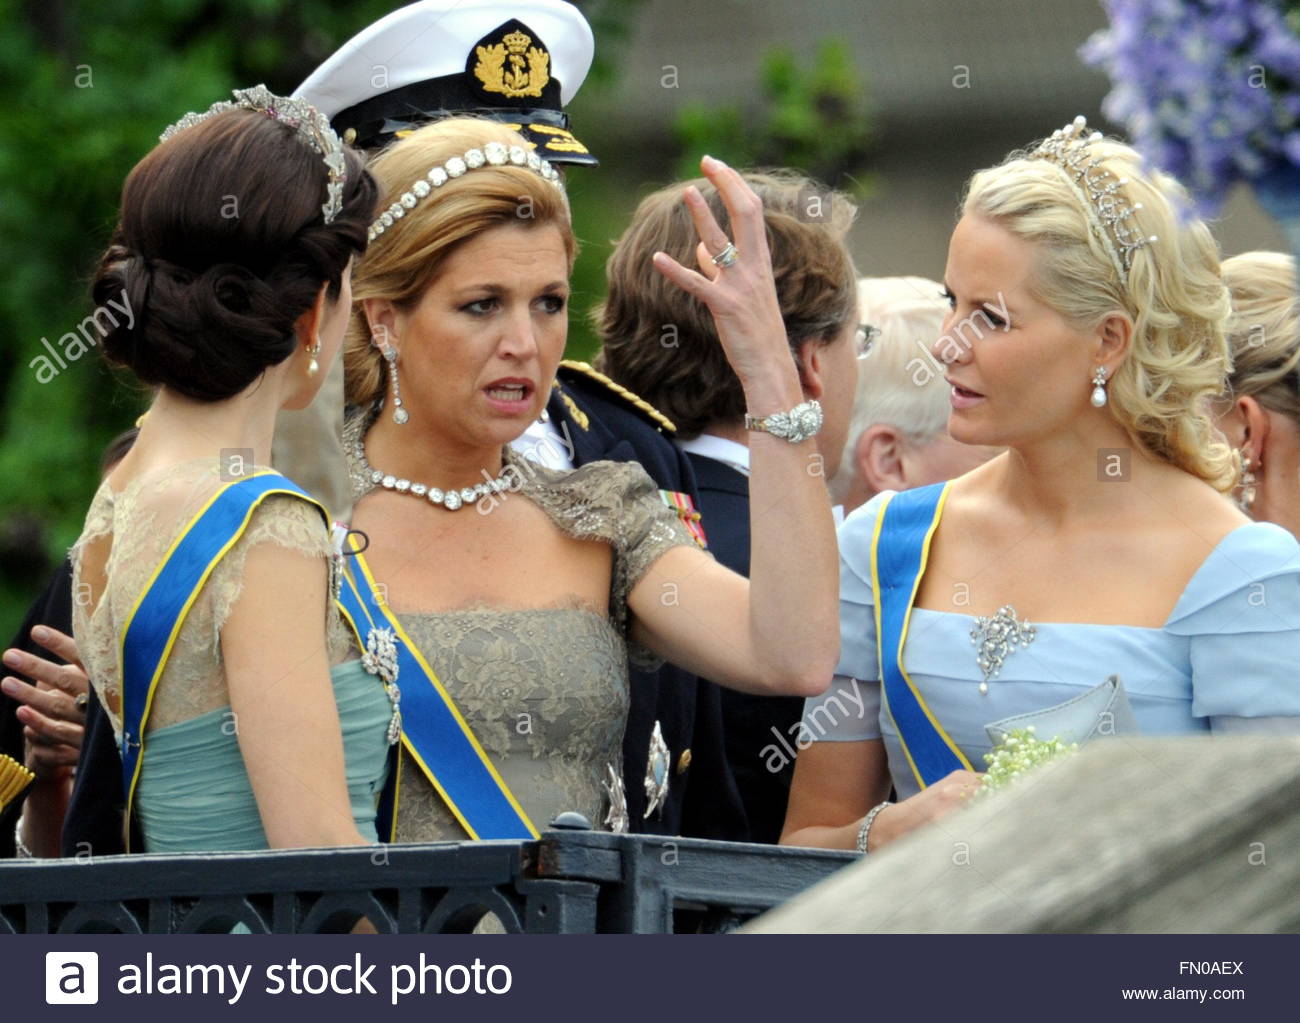 l-rprincess-mary-of-denmark-princess-maxima-of-the-netherlands-and-FN0AEX.jpg